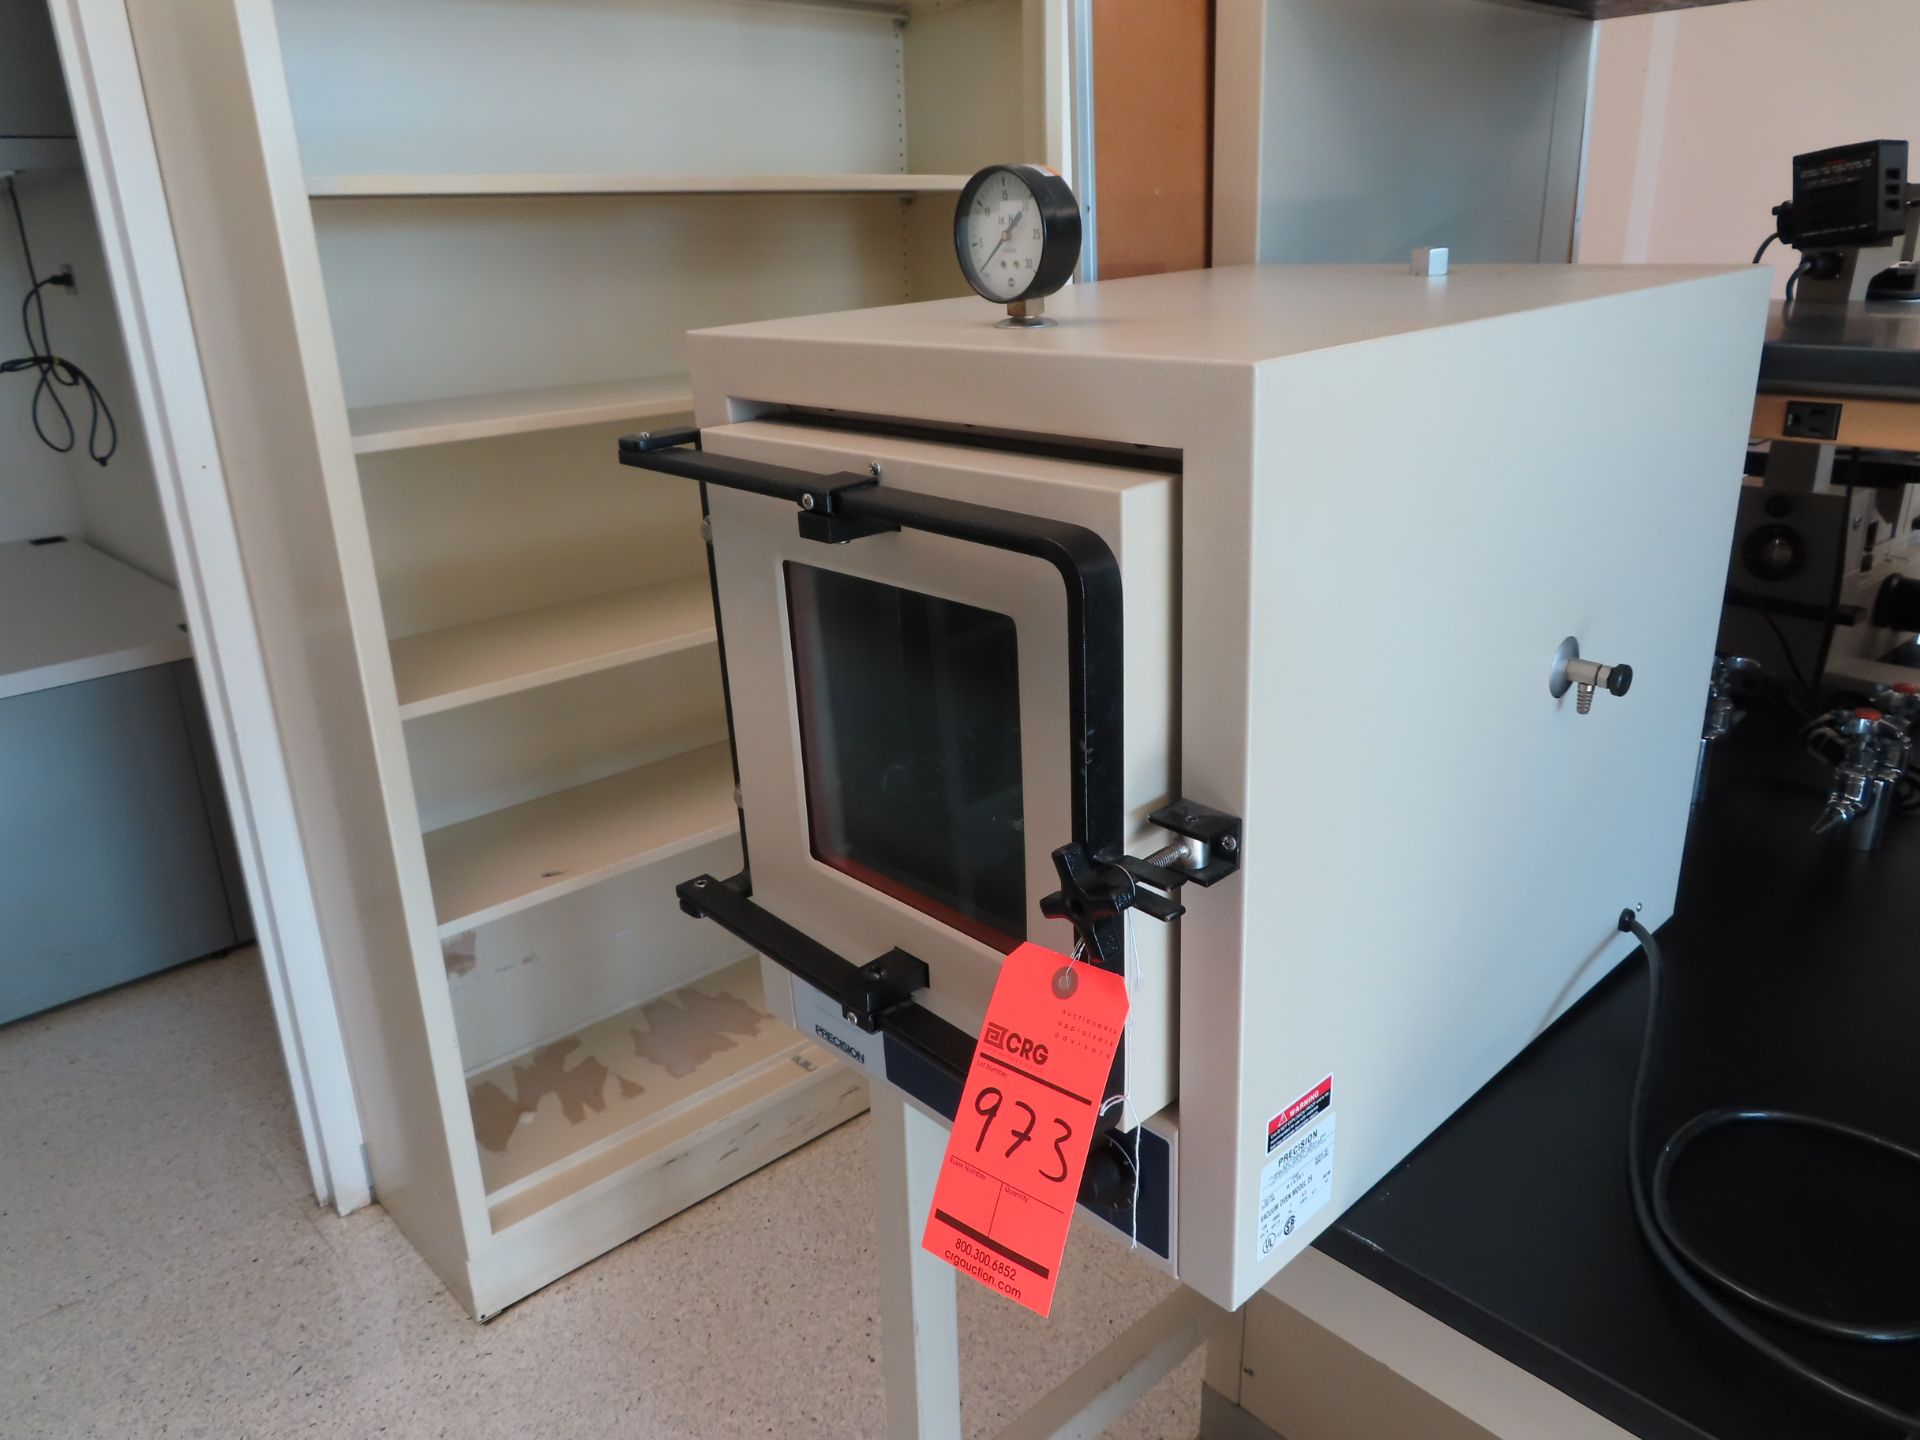 Precision 29 vacuum oven, s/n 699071284, located in D wing, 3rd floor, room 395E